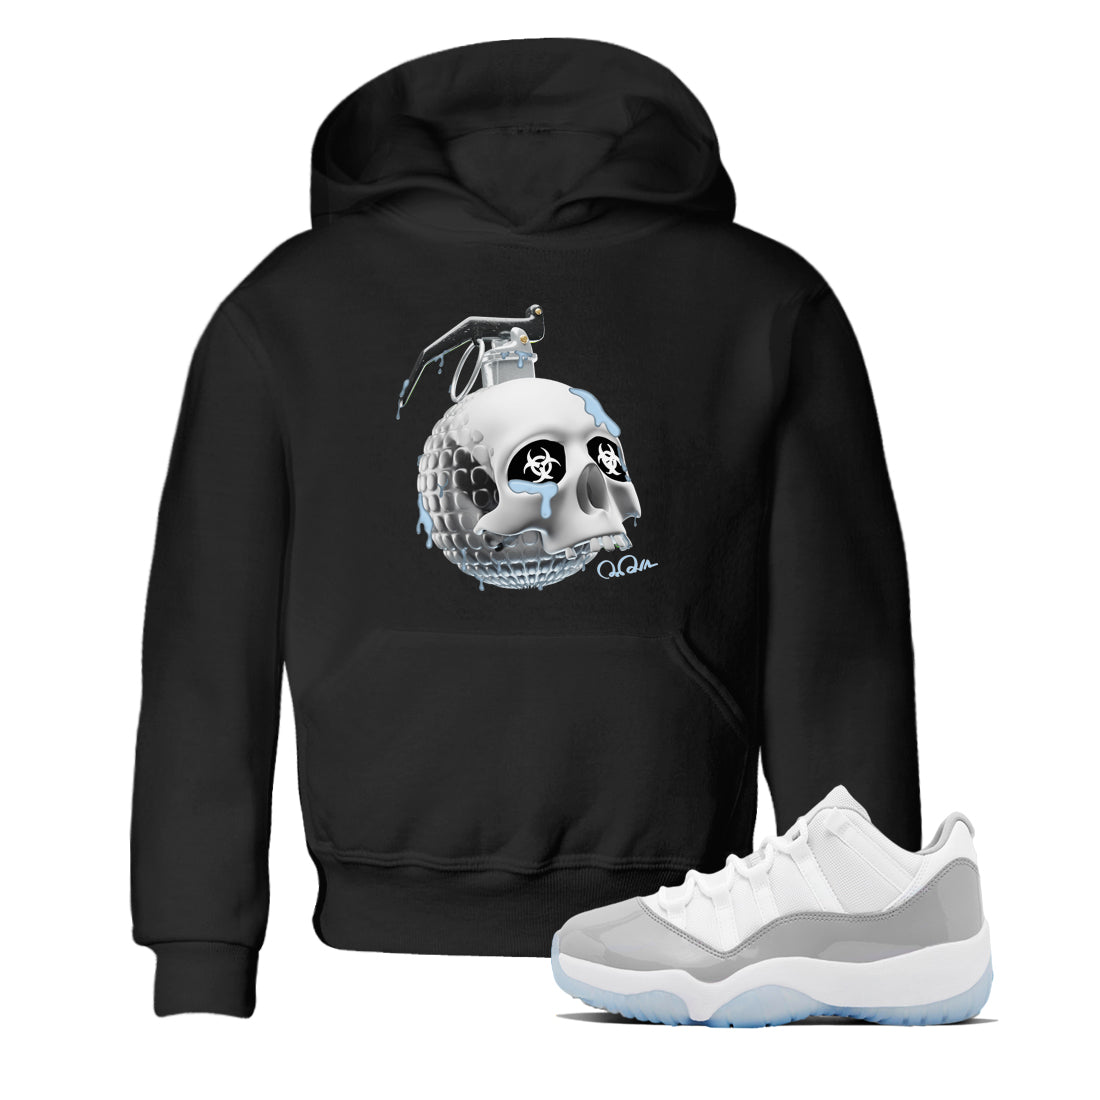 Air Jordan 11 White Cement Skull Bomb Baby and Kids Sneaker Tees Air Jordan 11 Cement Grey Kids Sneaker Tees Washing and Care Tip